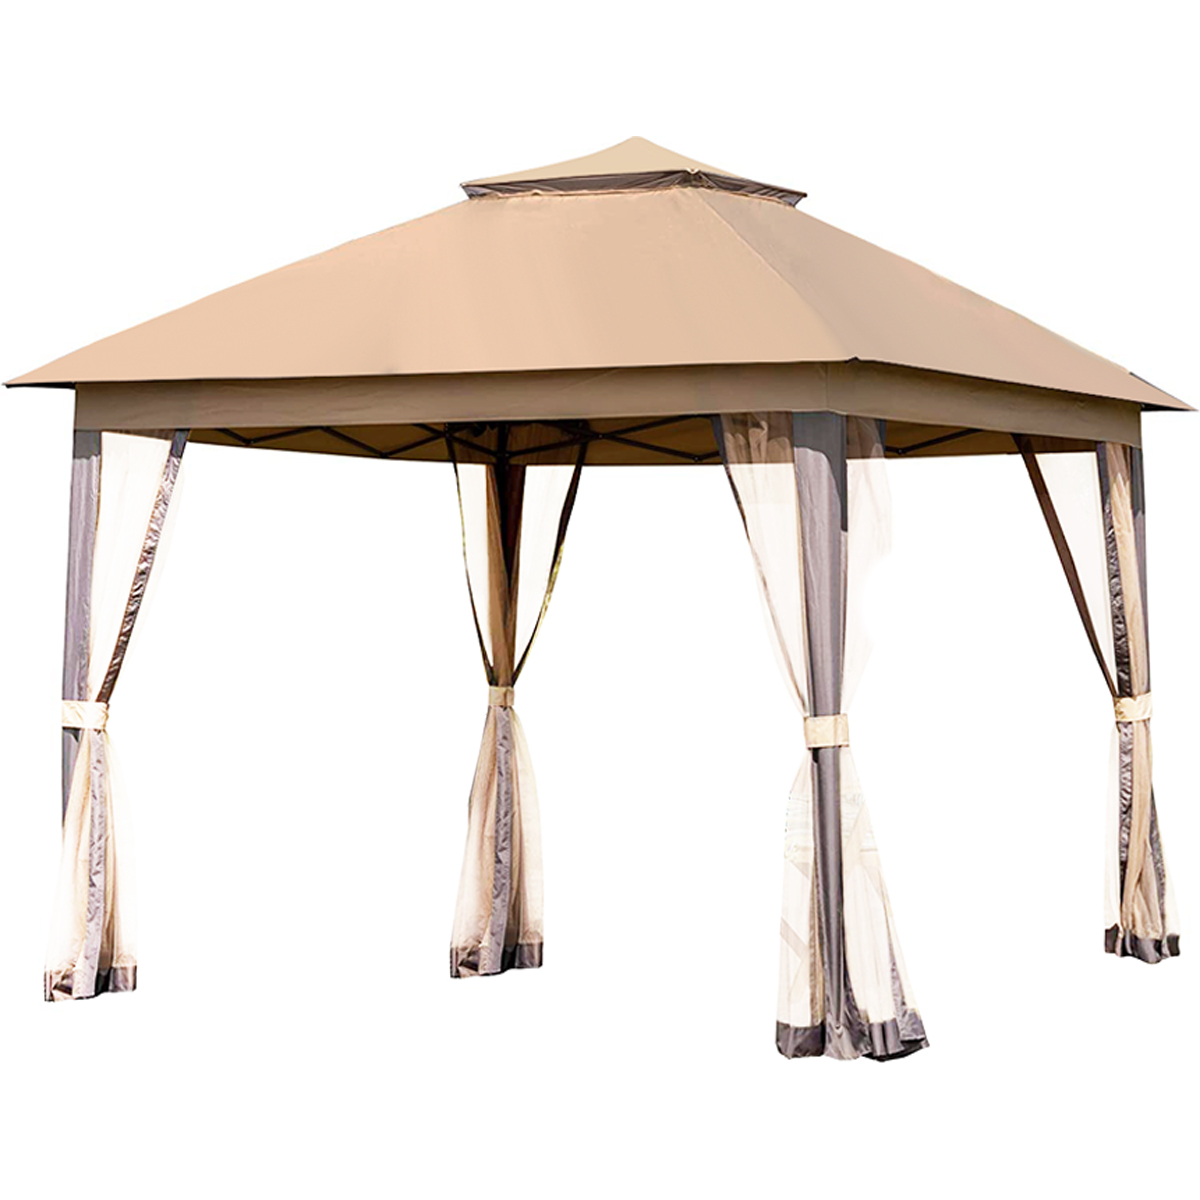 Replacement Canopy for Pamapic 11x11 Shelter Tent - RipLock 350